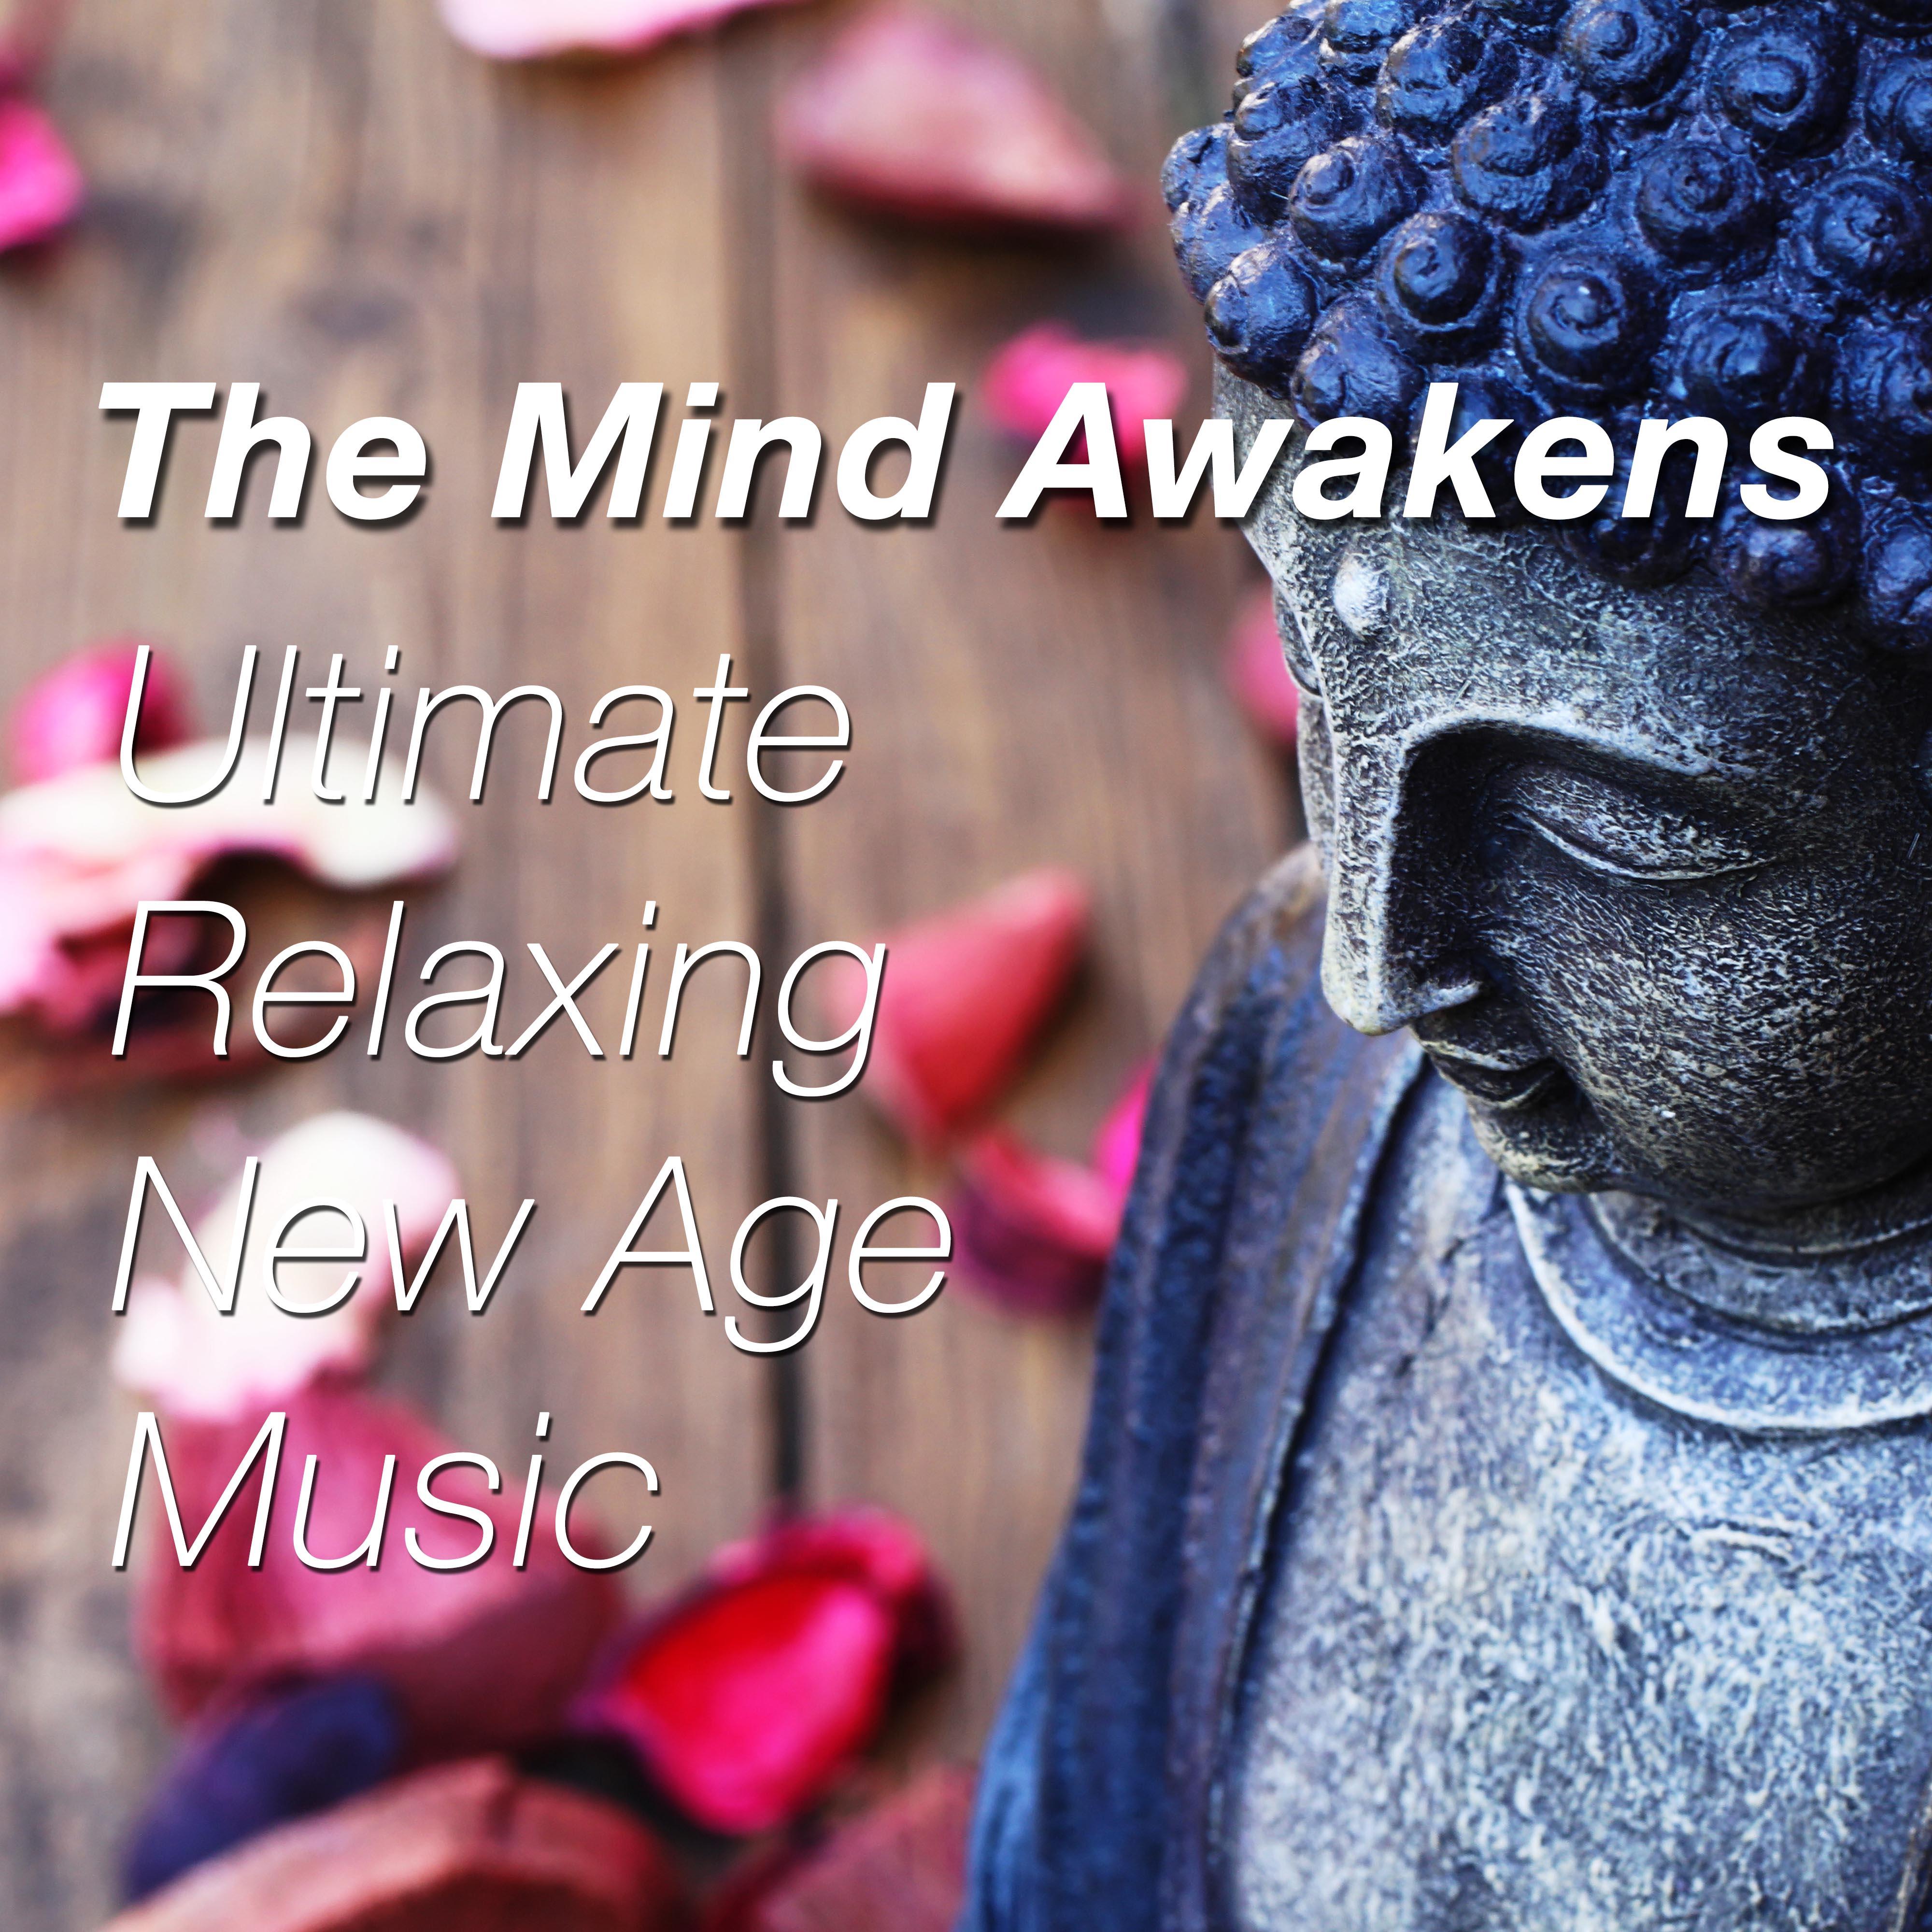 The Mind Awakens - the Ultimate Relaxing New Age Music for Meditation Techniques with Shakuhachi Flute, Piano and Nature Vibes (Rain, Wind, Sea and Ocean Sound Effects)